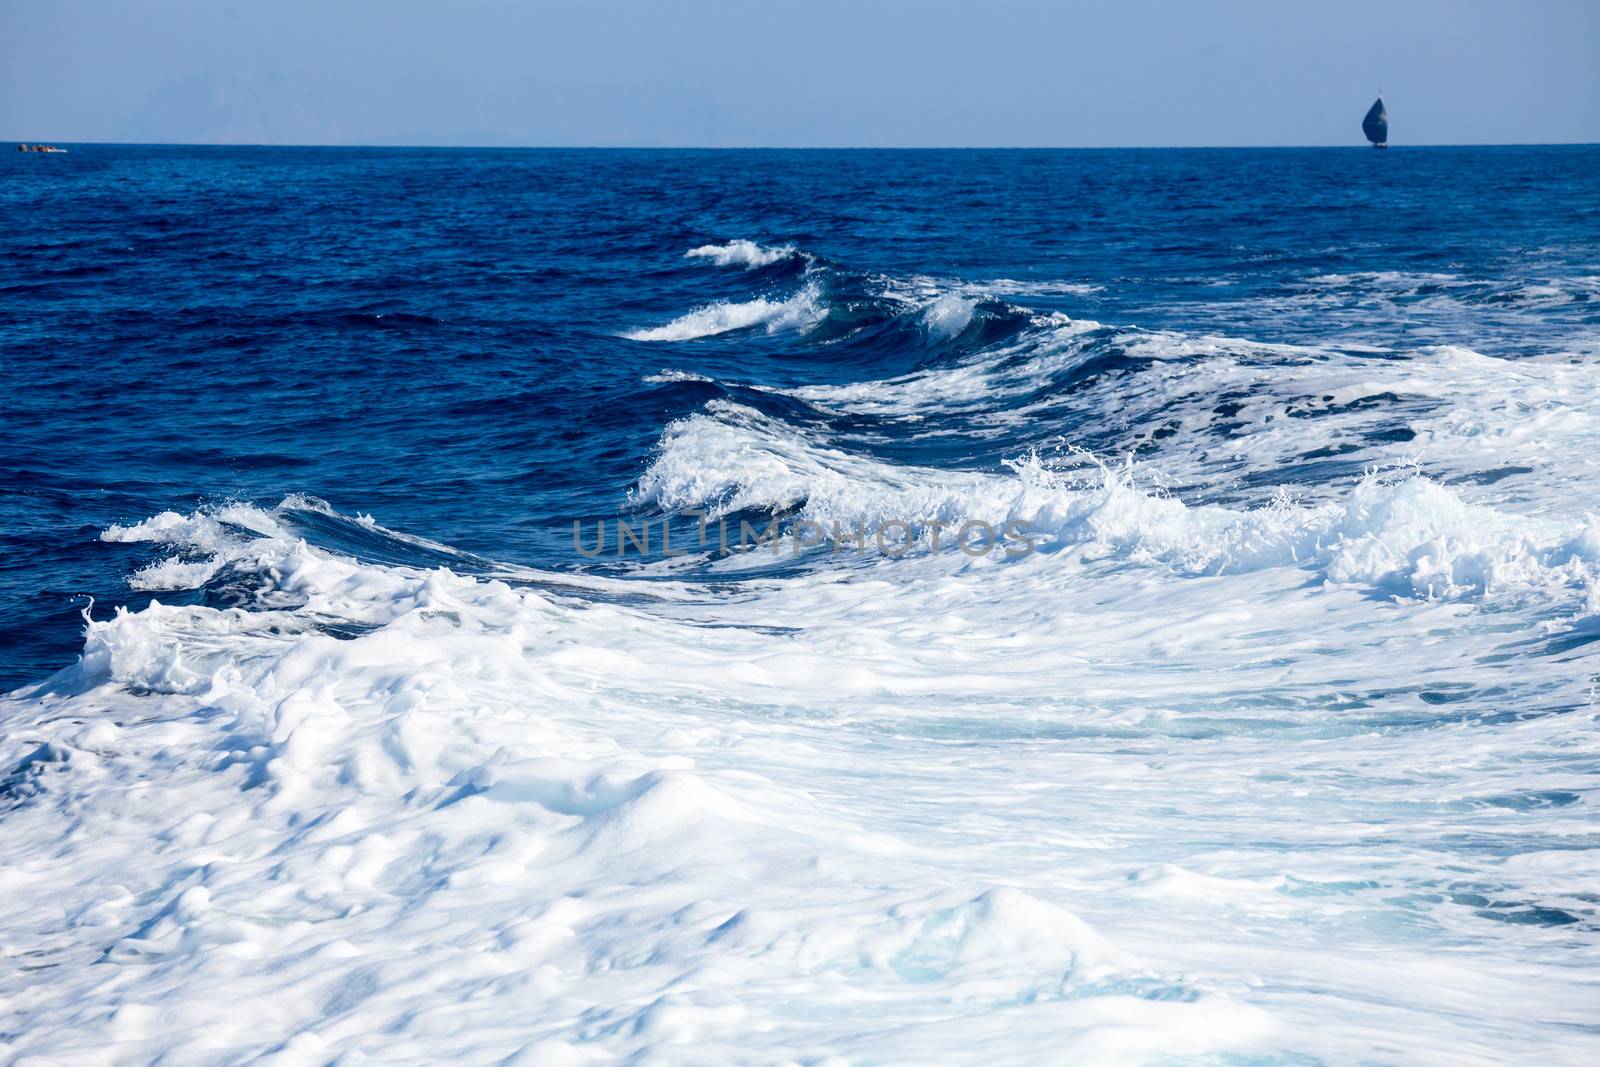 Sea water with waves background